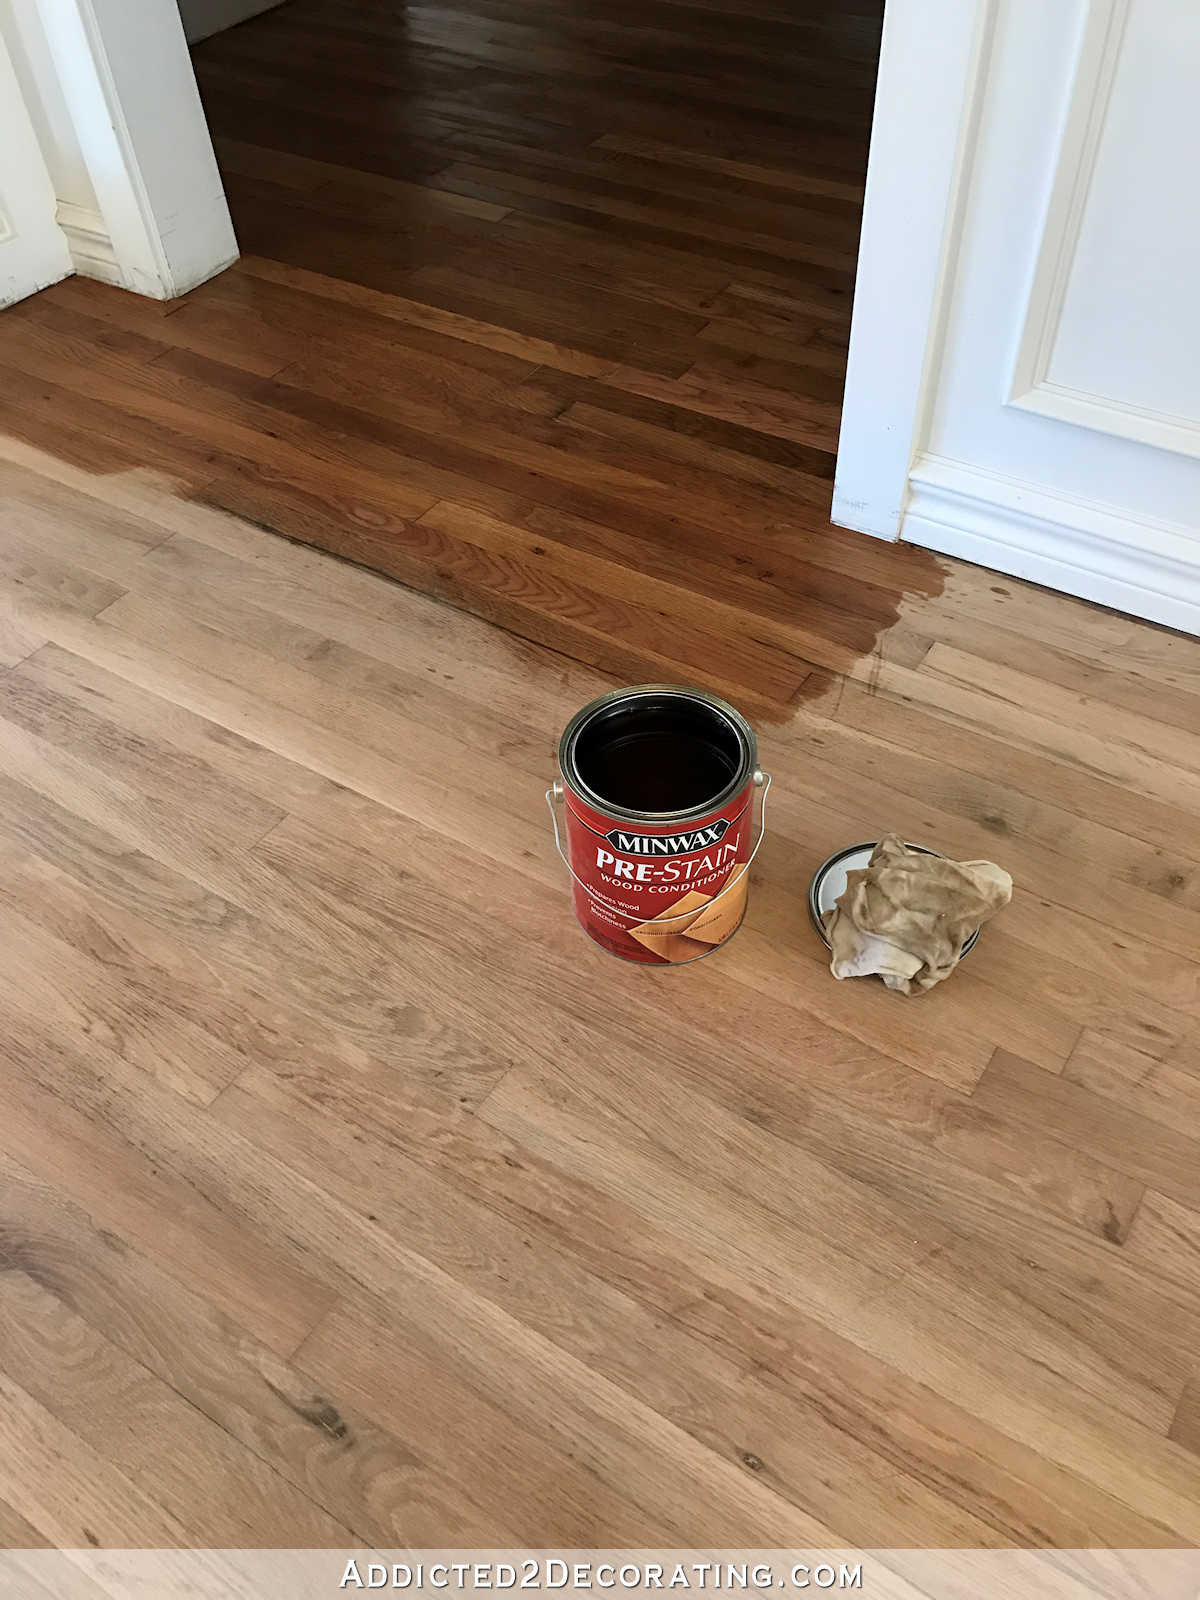 how to replace hardwood floor boards of adventures in staining my red oak hardwood floors products process within staining red oak hardwood floors 1 conditioning the wood with minwax pre stain